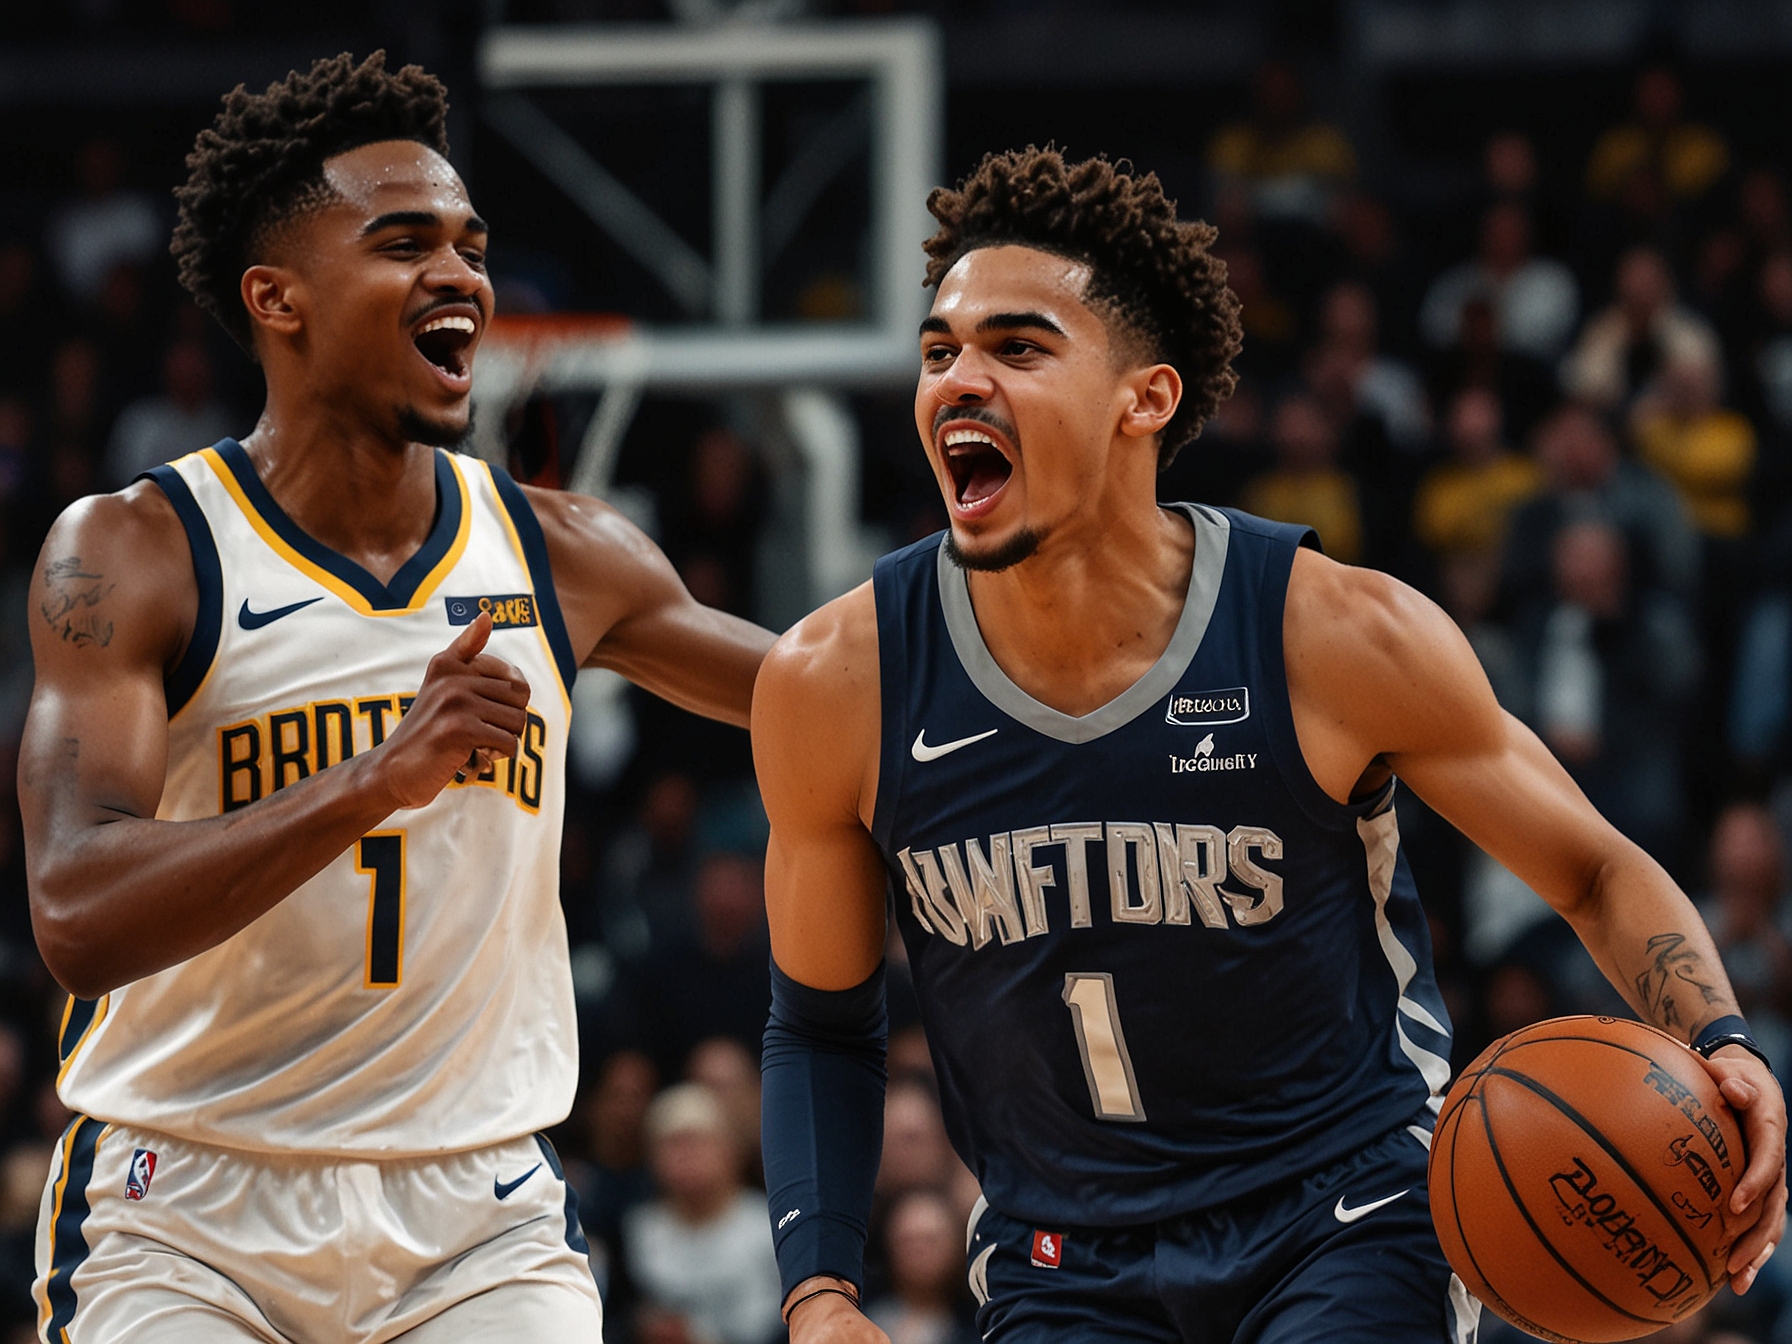 Ja Morant and Trae Young's tweets praising Pritchard's shot are displayed alongside a highlight of the buzzer-beater, capturing their excitement and admiration for the stunning play.